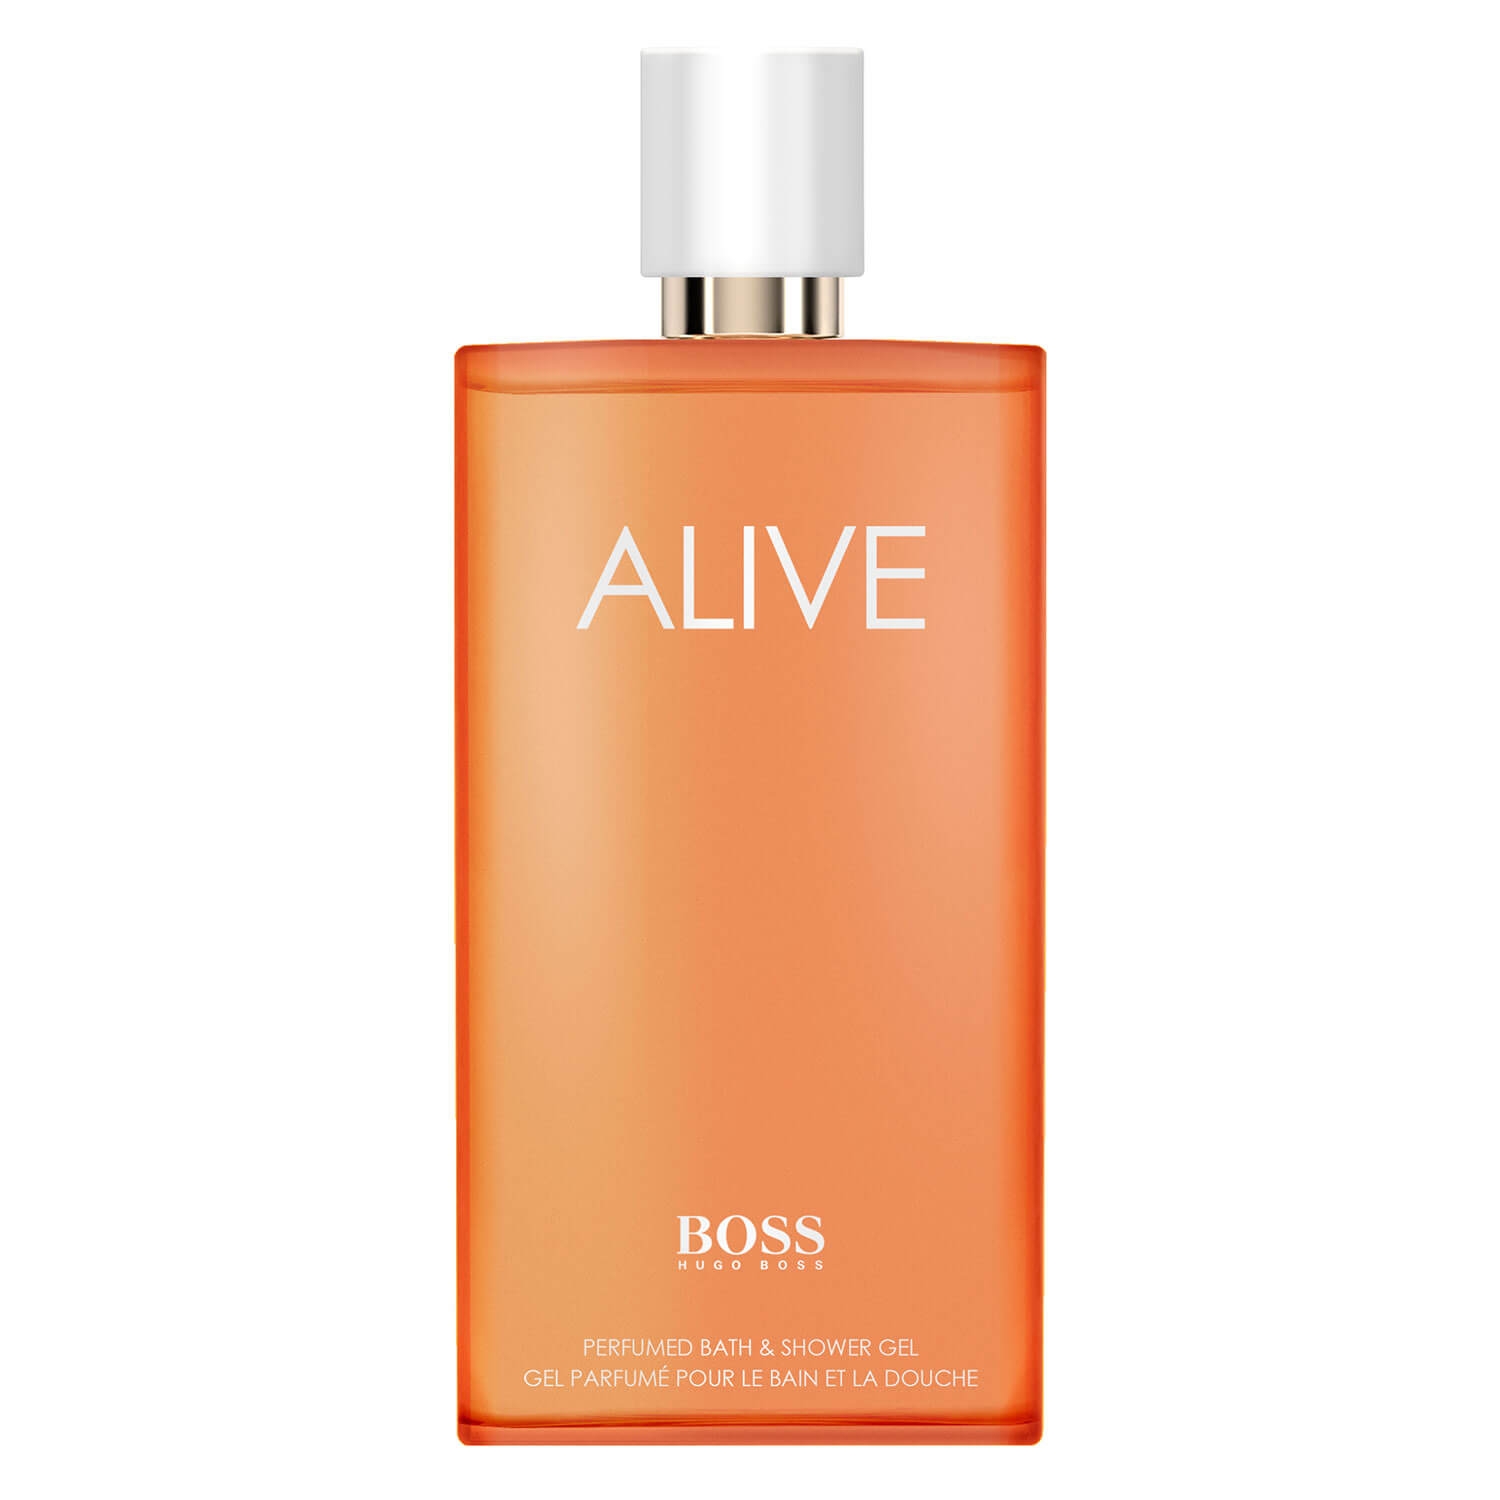 Product image from Boss Alive - Shower Gel